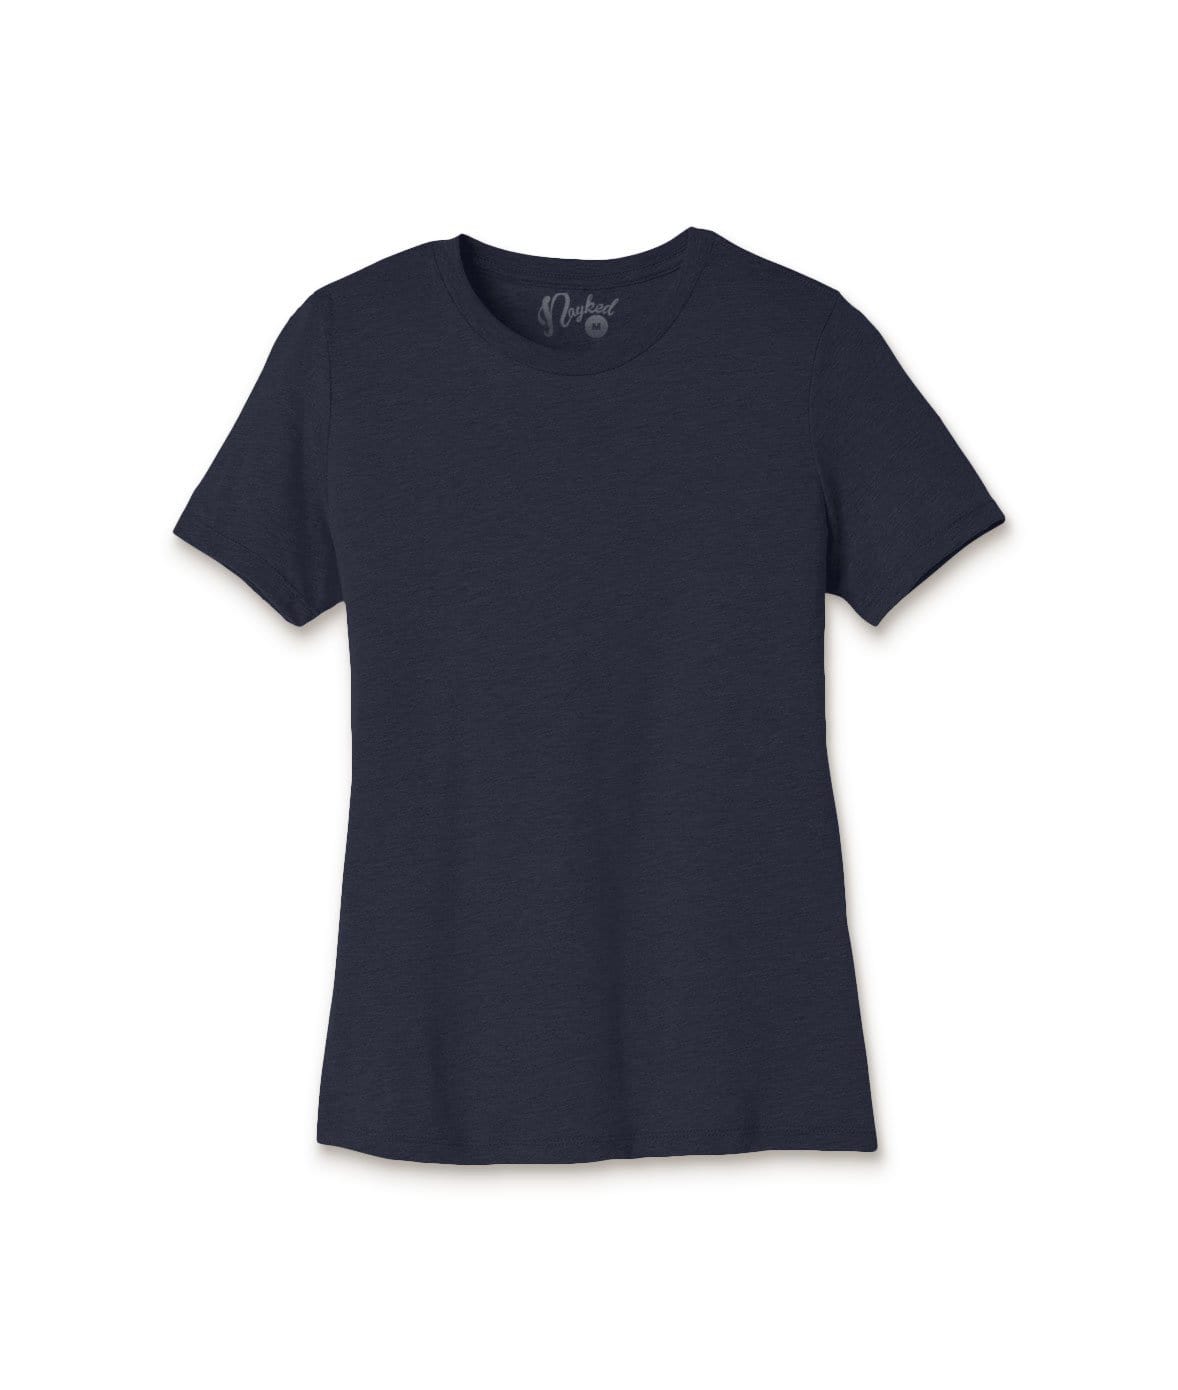 Nayked Apparel Women's Ridiculously Soft Relaxed Fit Lightweight T-Shirt